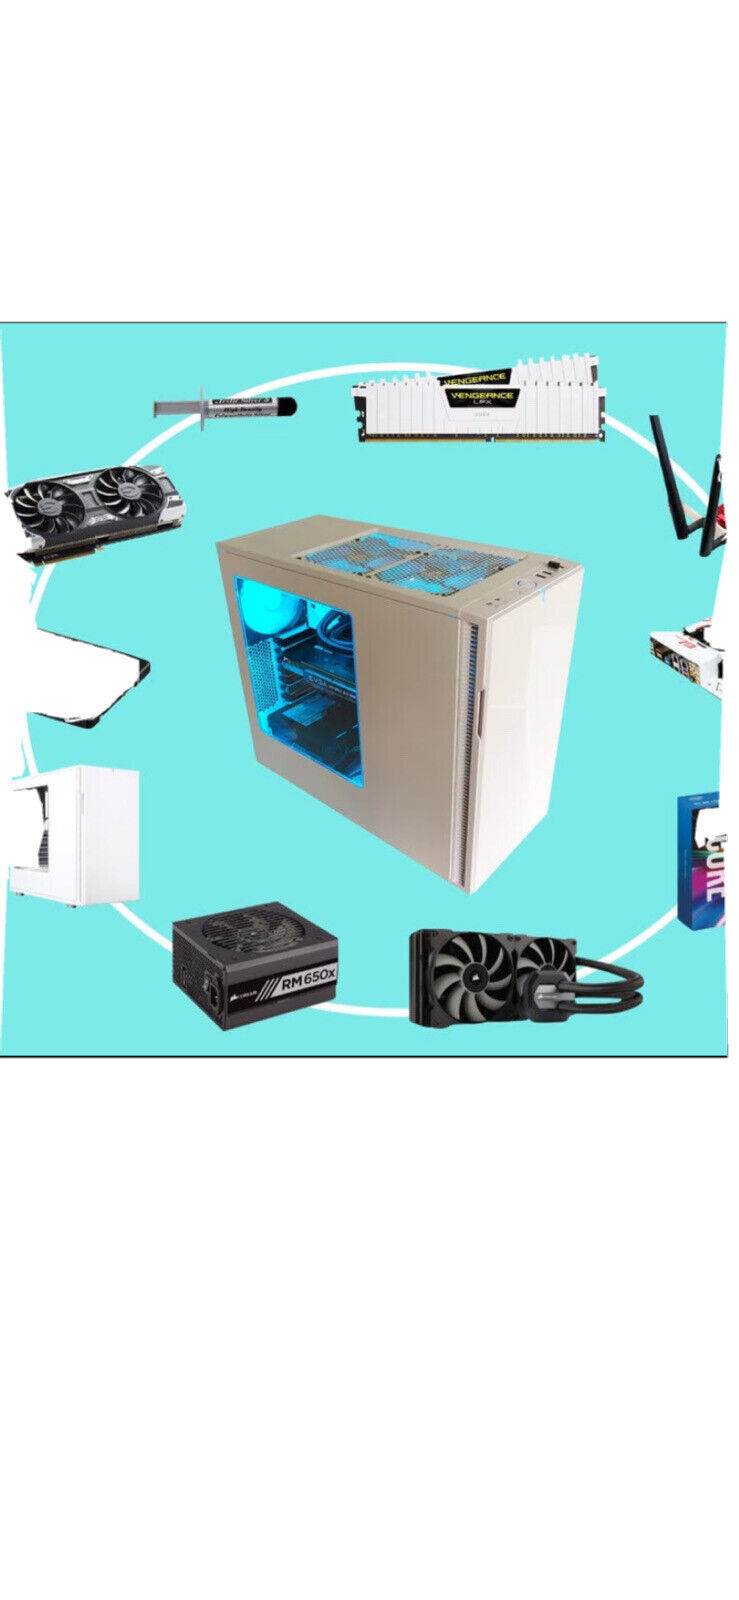 Find/build your own computer,Read The Description Below (I’m Not Scamming U